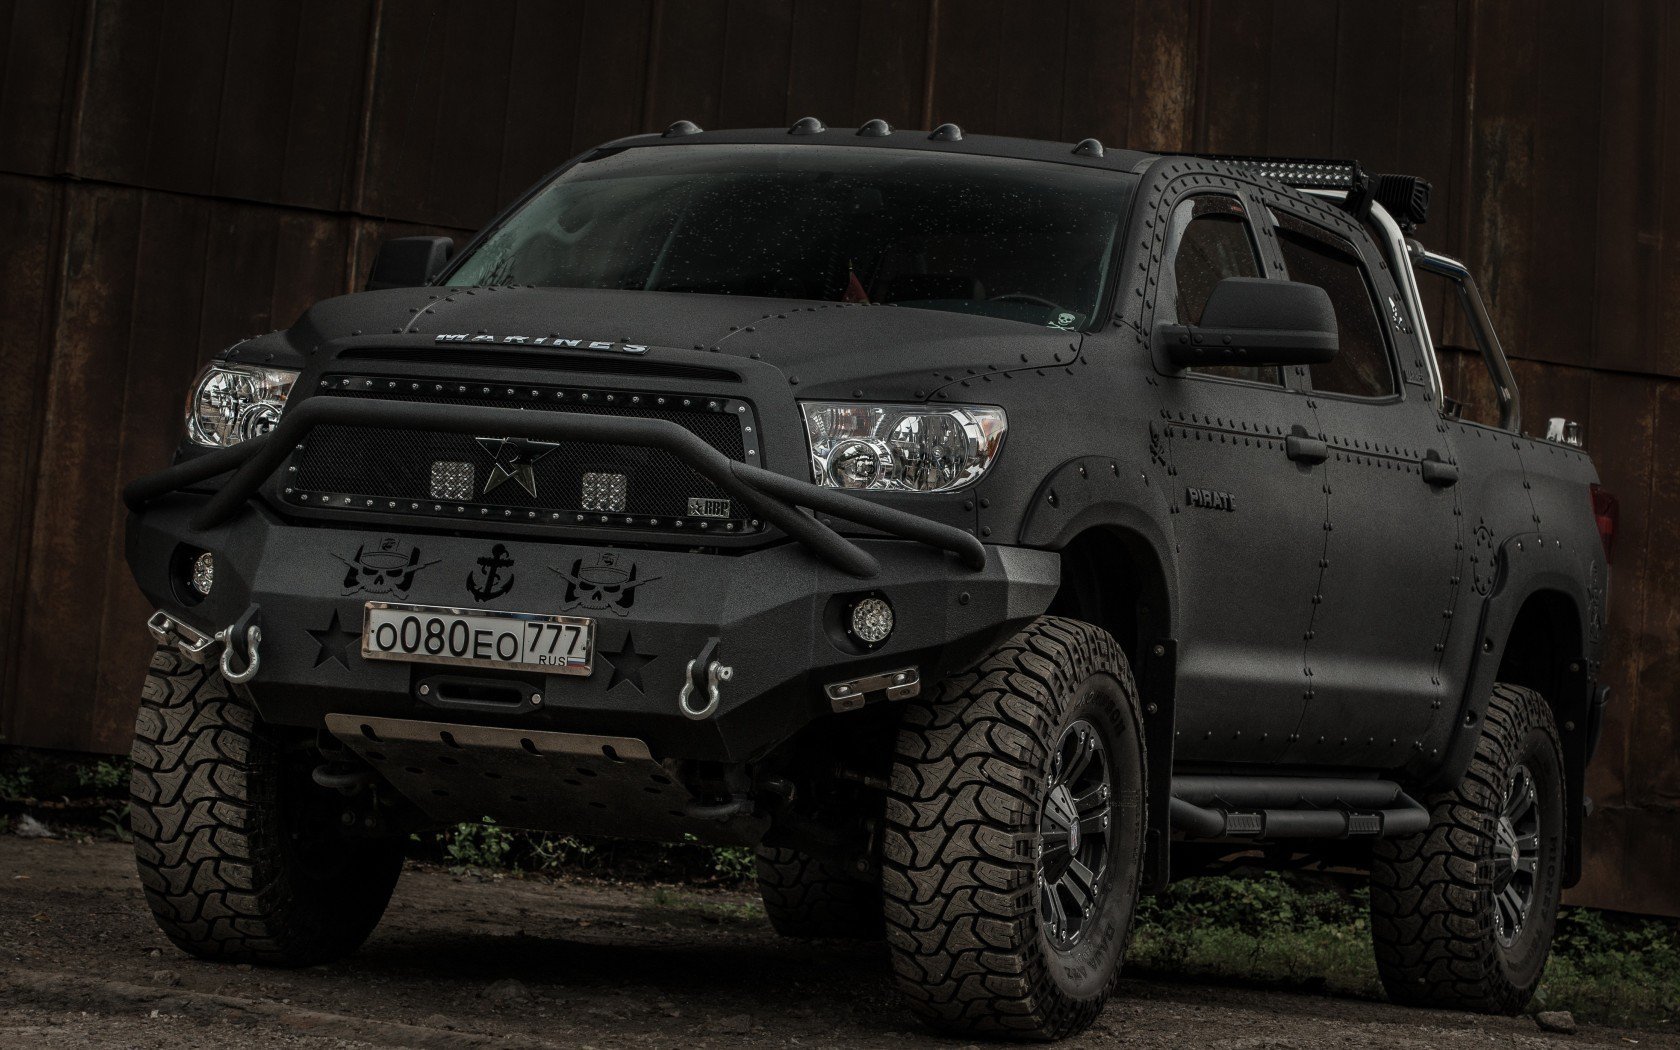 Toyota tundra wallpaper free download for pc